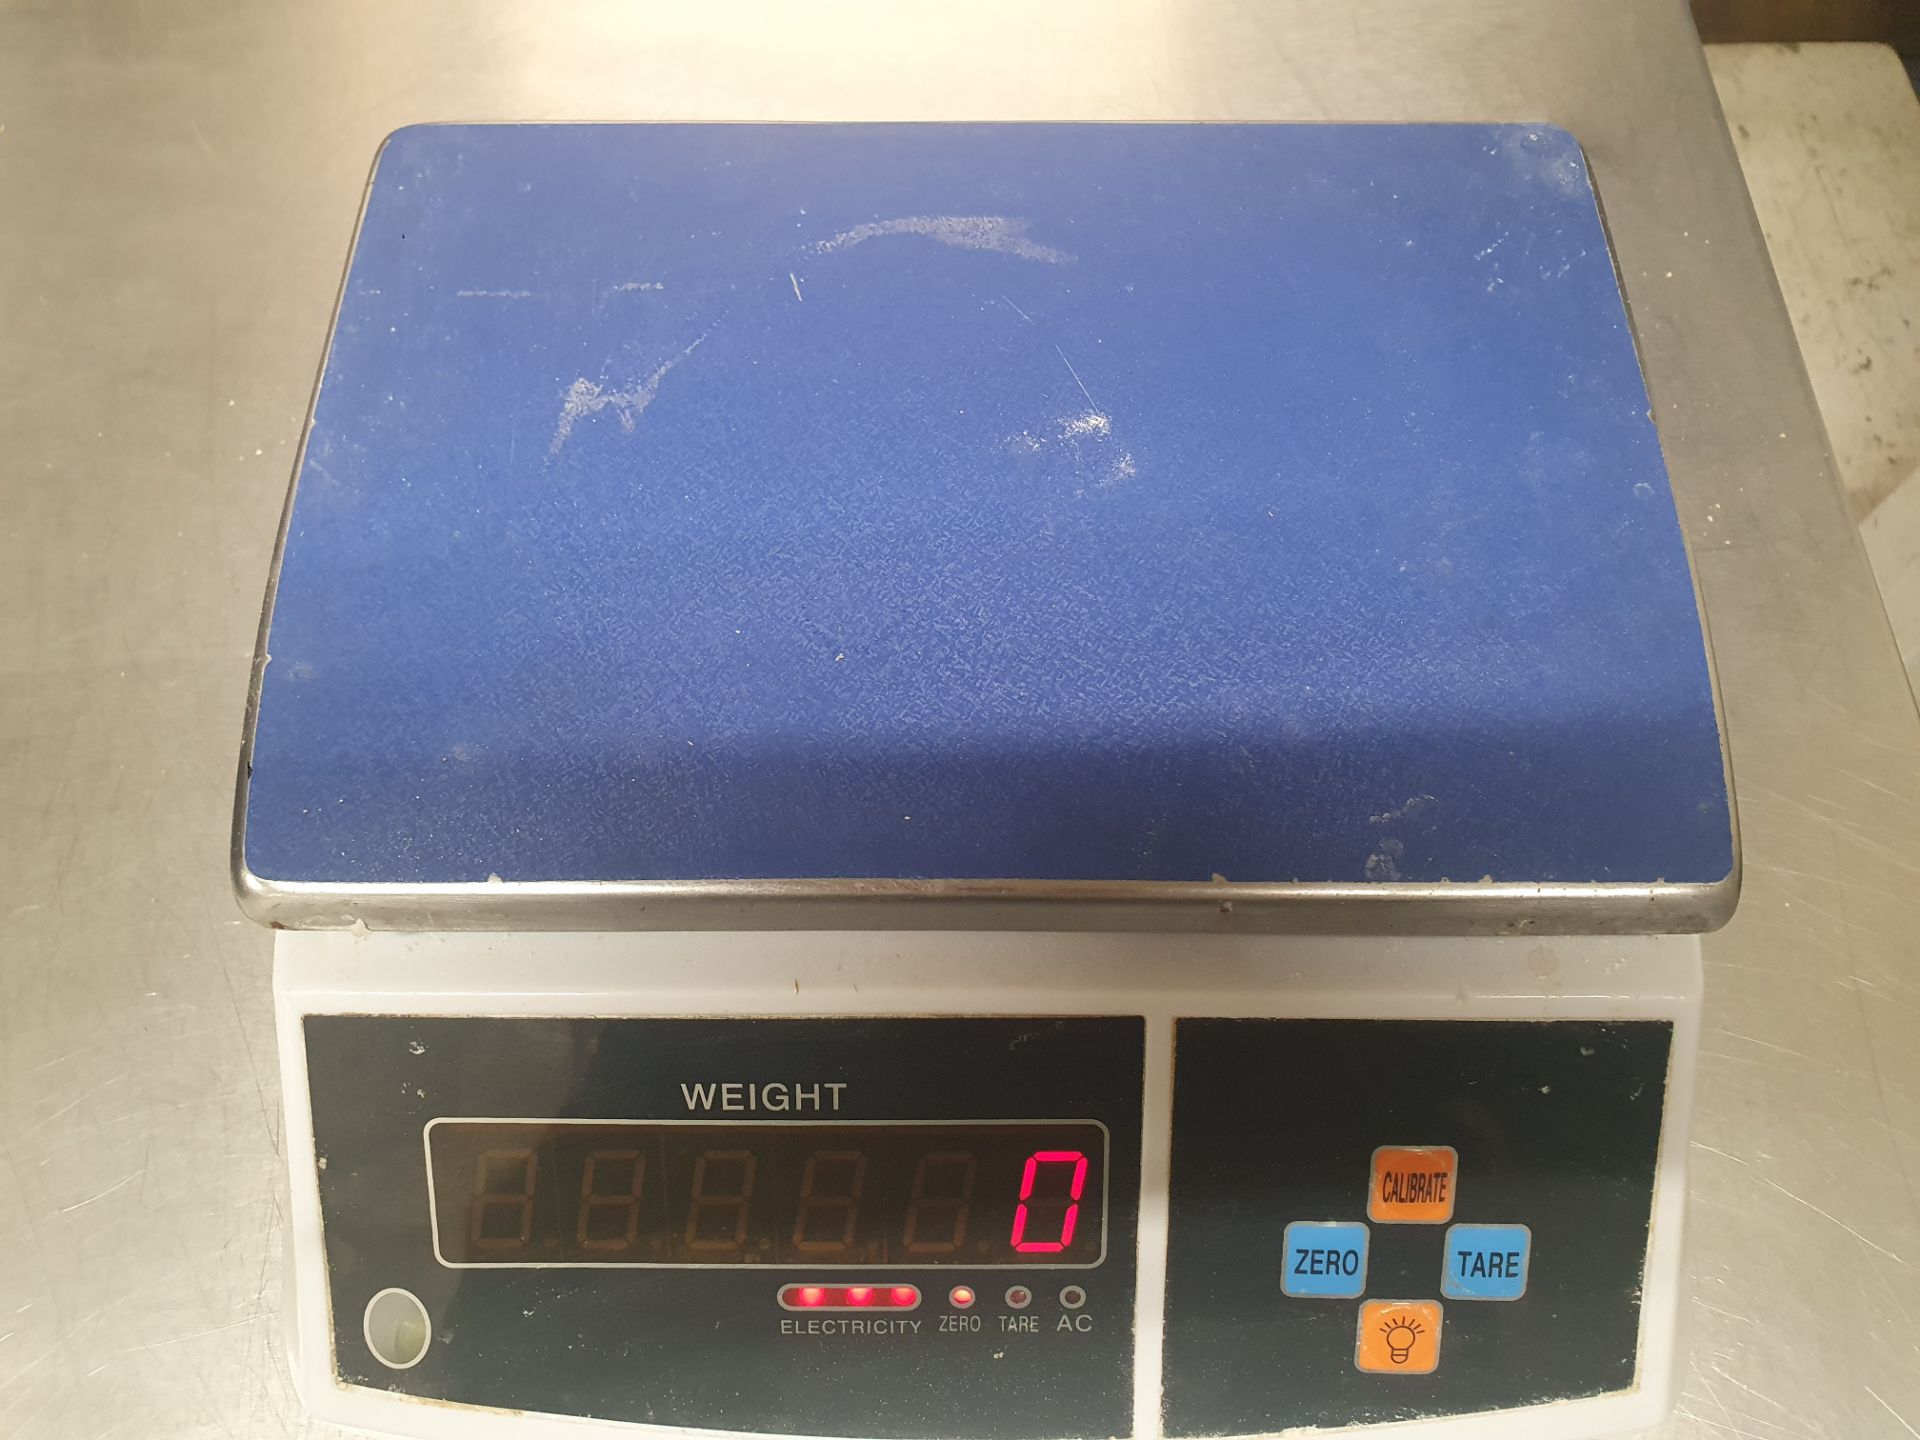 Digital Kitchen Scales. 30kgs Max. Capacity. New. Boxed - Image 8 of 9